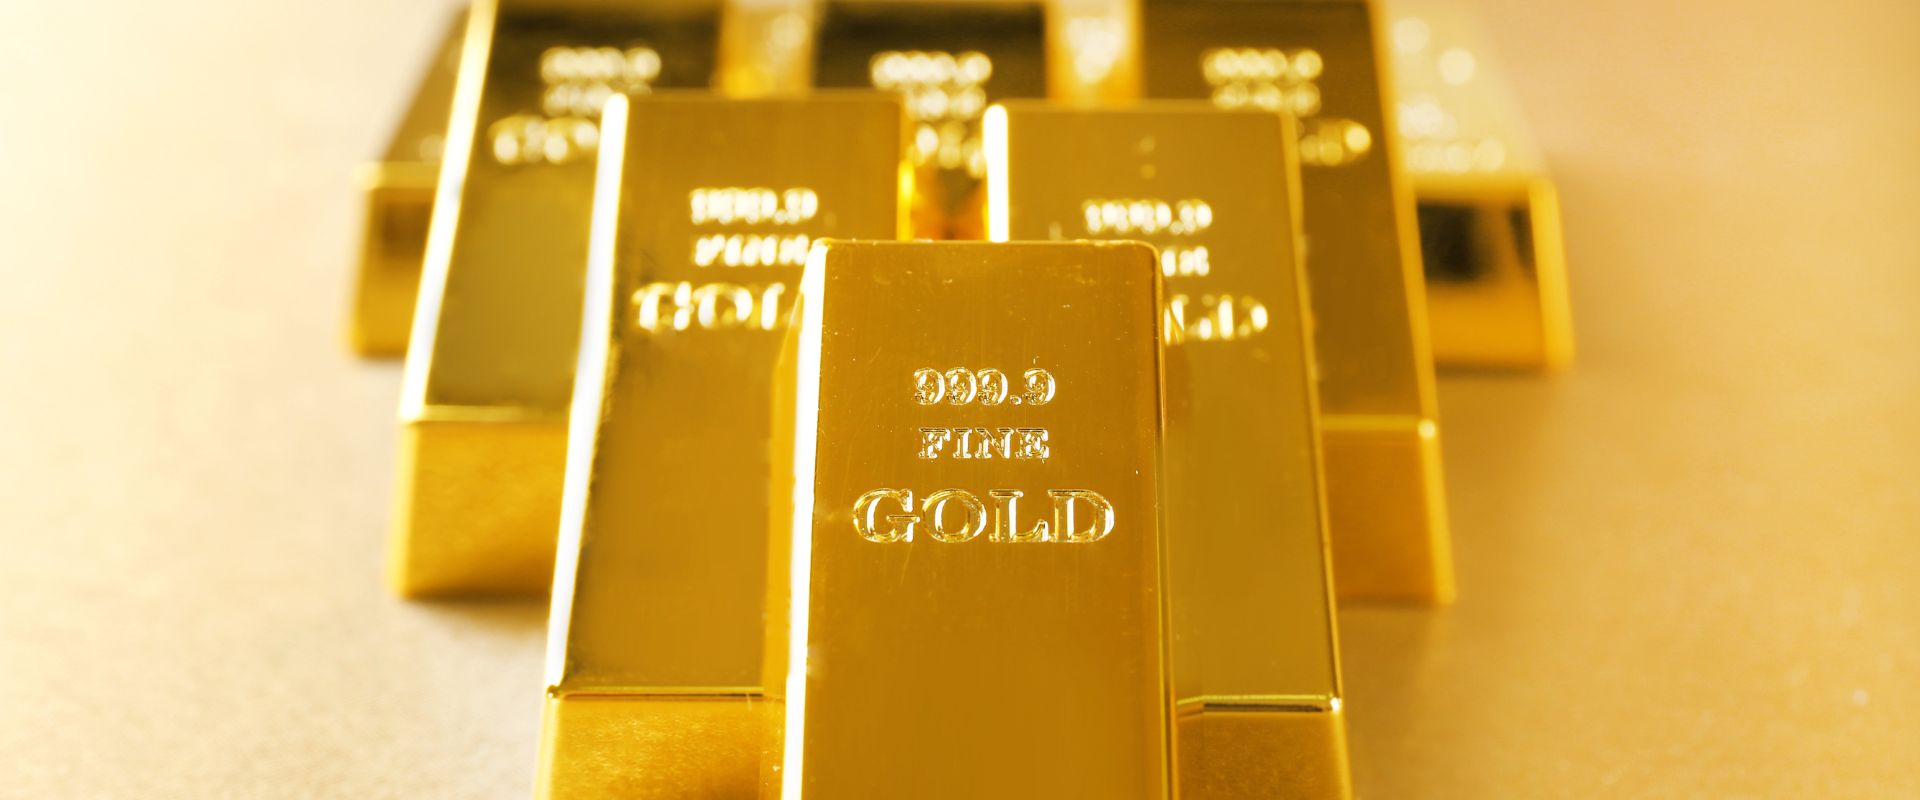 close up of stacks of engraved gold bars